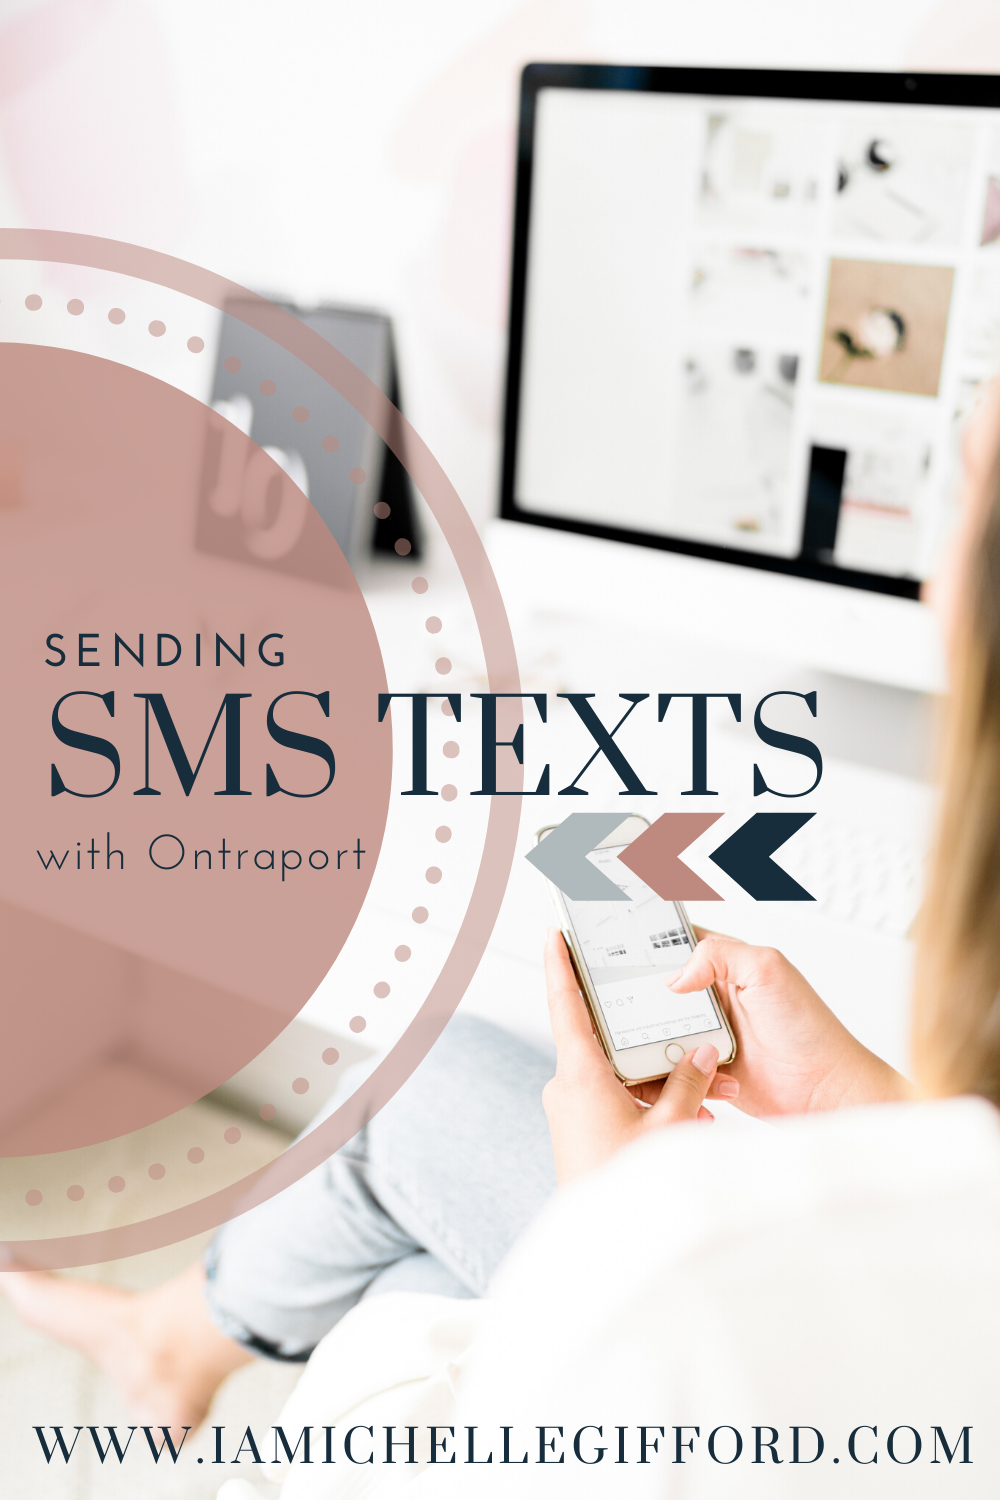 Sending SMS Text Messages Using Ontraport-How to guide www.iammichellegifford.com